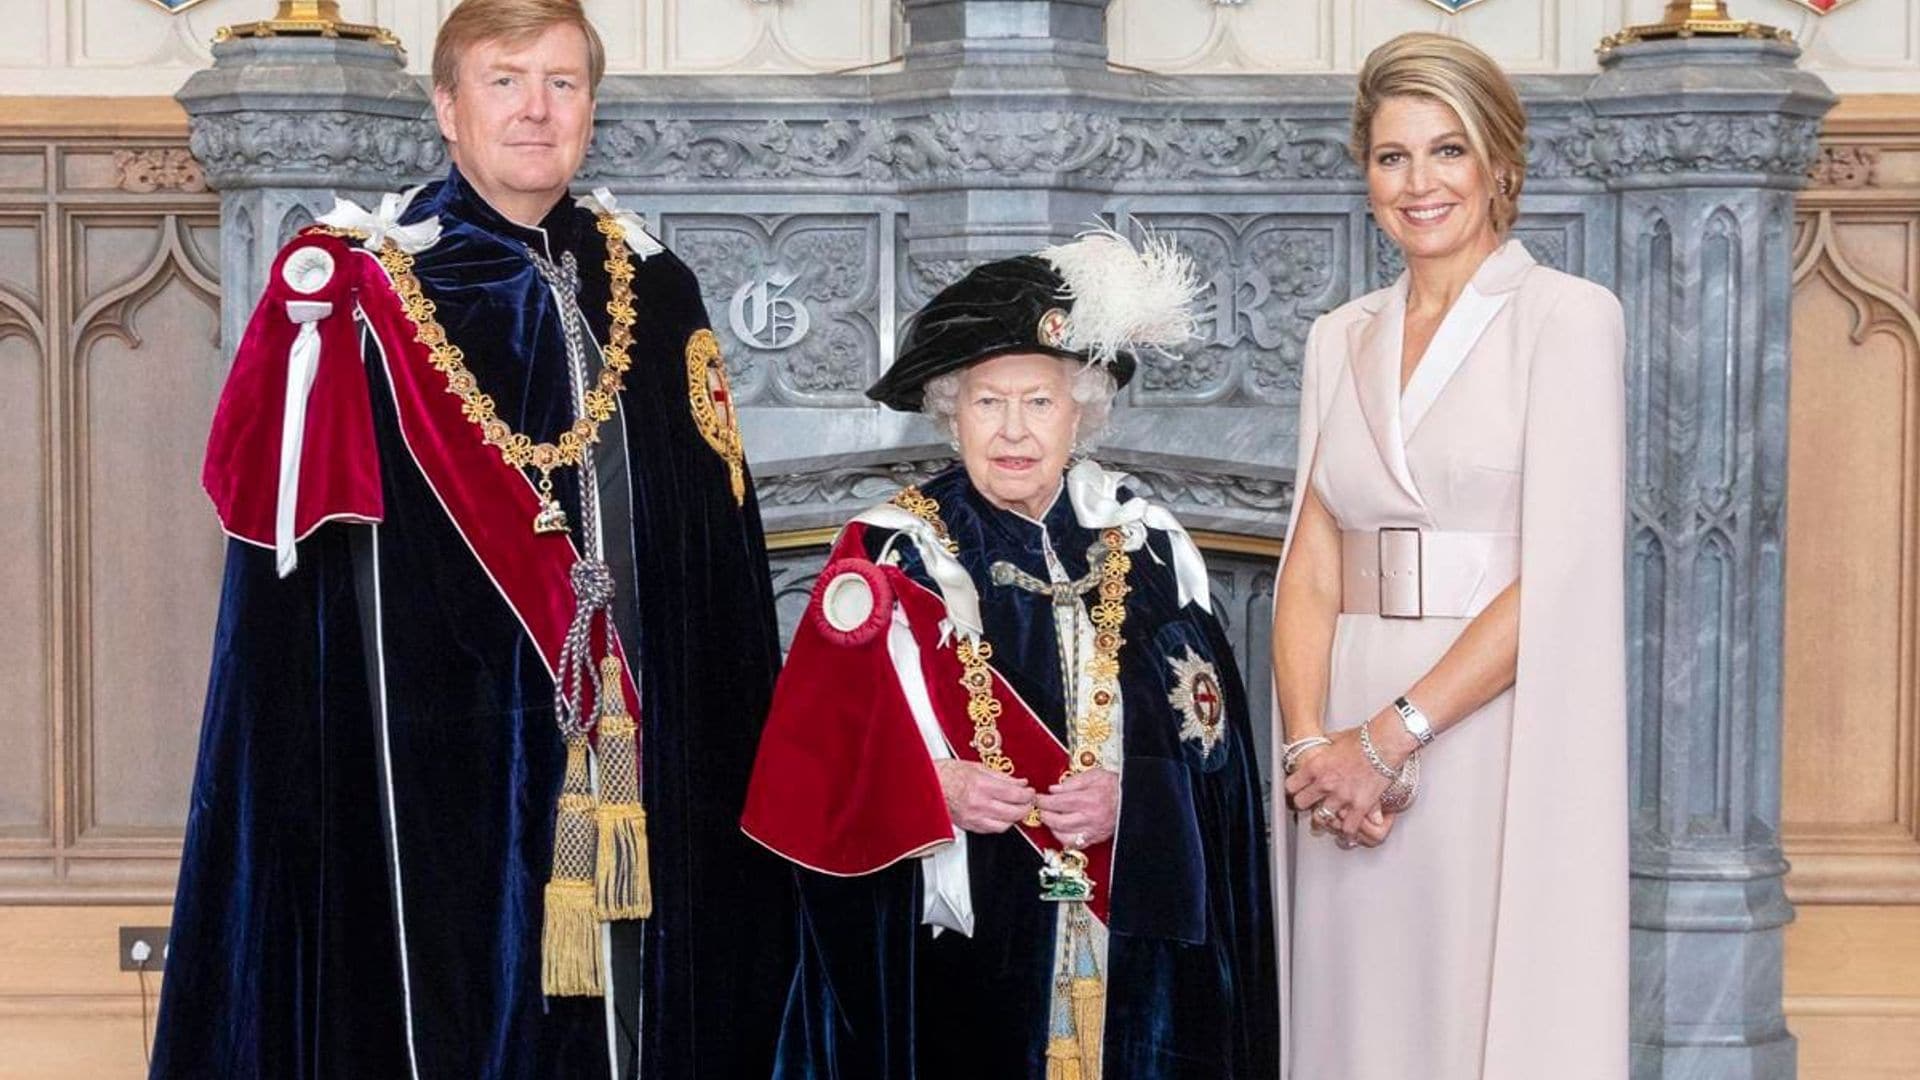 Queen Maxima and King Willem-Alexander remember Queen Elizabeth ‘with deep respect and great affection’